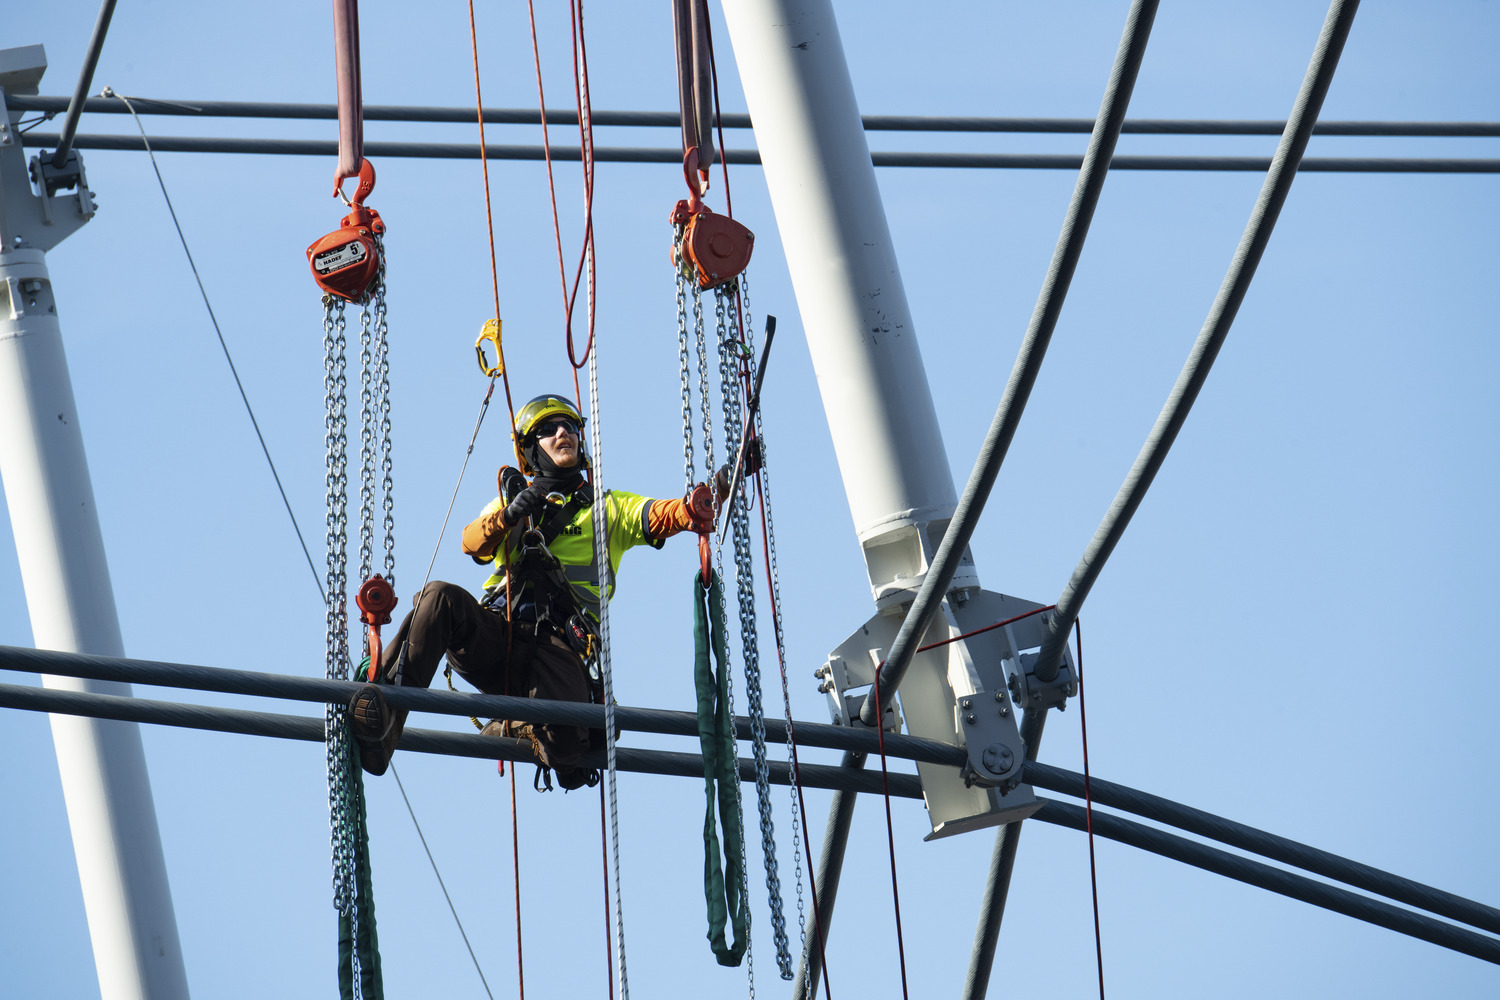 Ironworker suspended above Allegiant Stadium erecting the cable net roofing system.